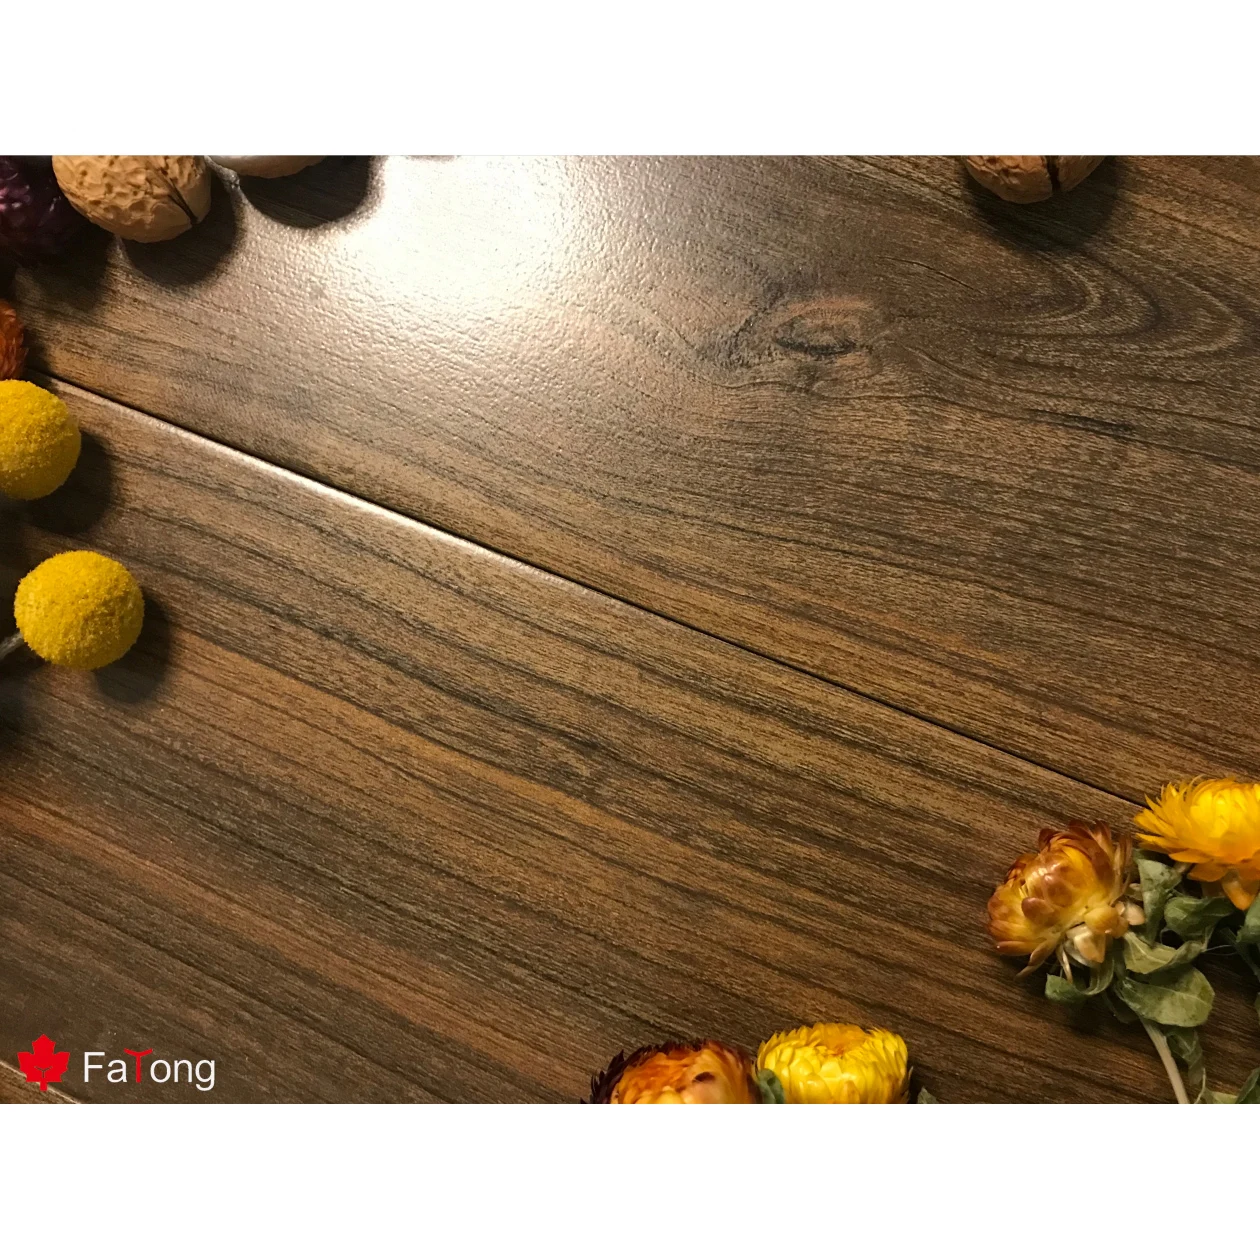 
Foshan Fatong 15X80cm Wooden Floor Tiles Ceramic Flooring Designs Good Price Decorative Tile For Living Room And Wall  (1600278602000)